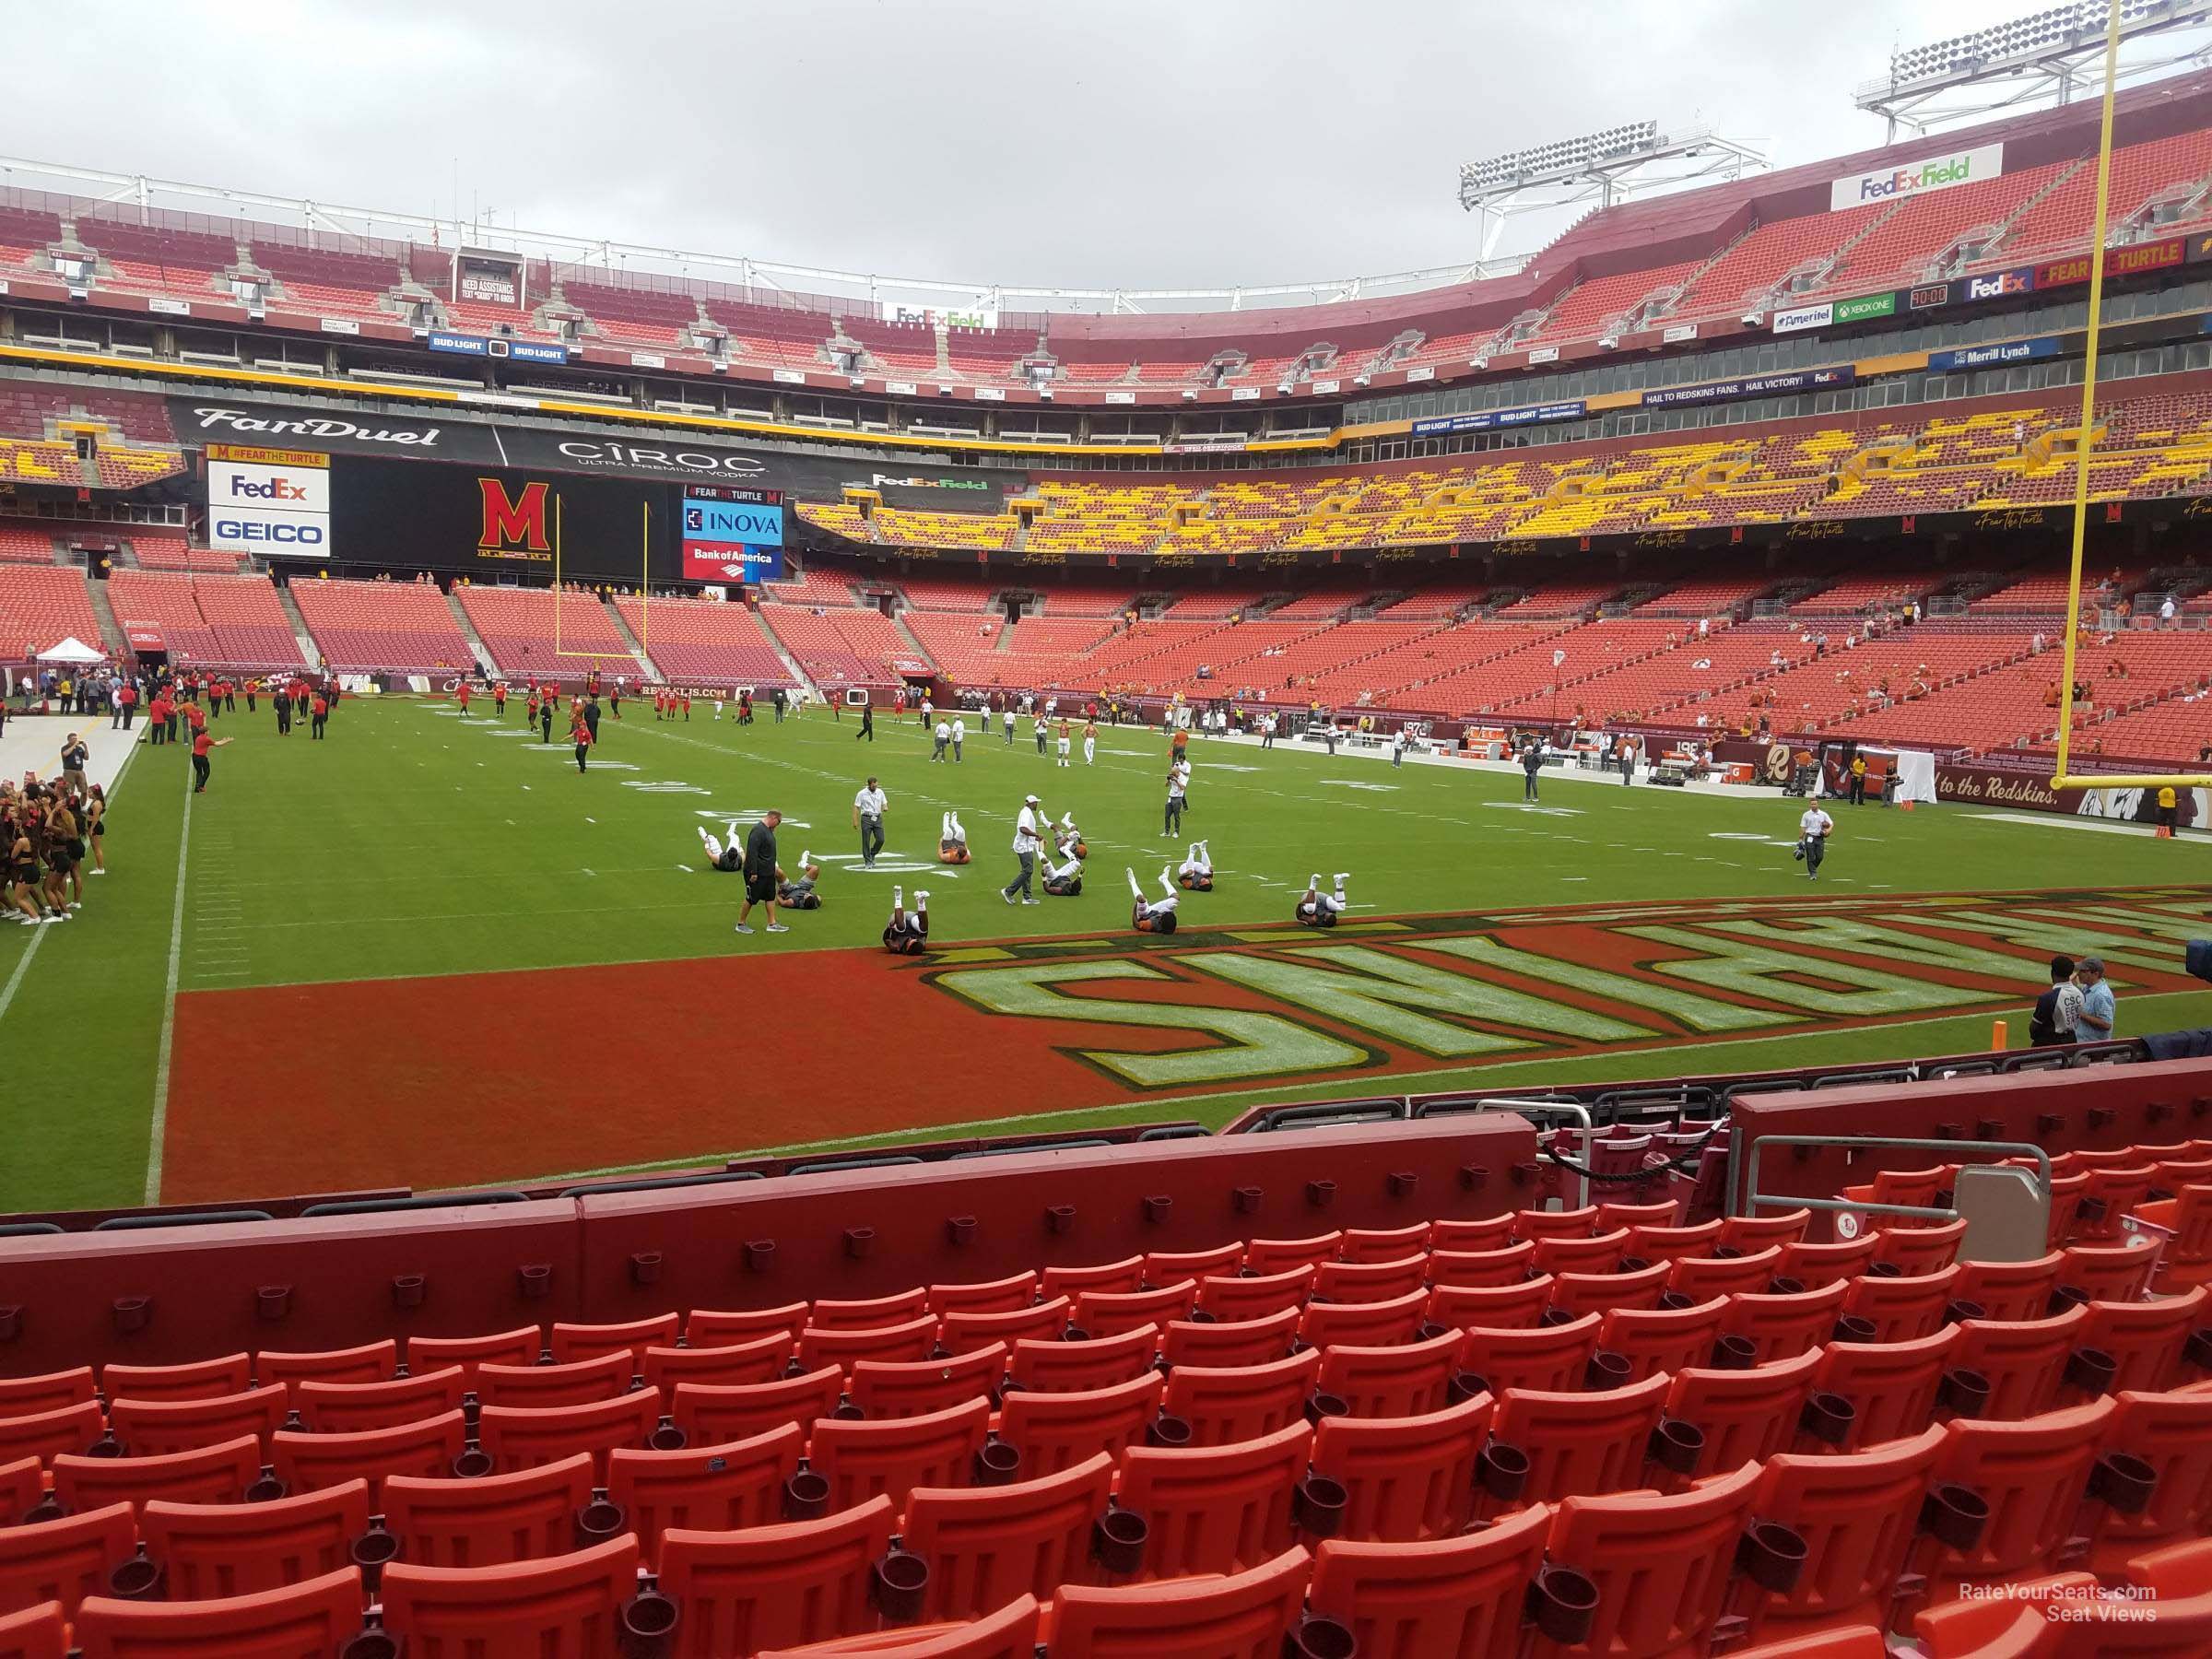 section 134, row 13 seat view  - fedexfield